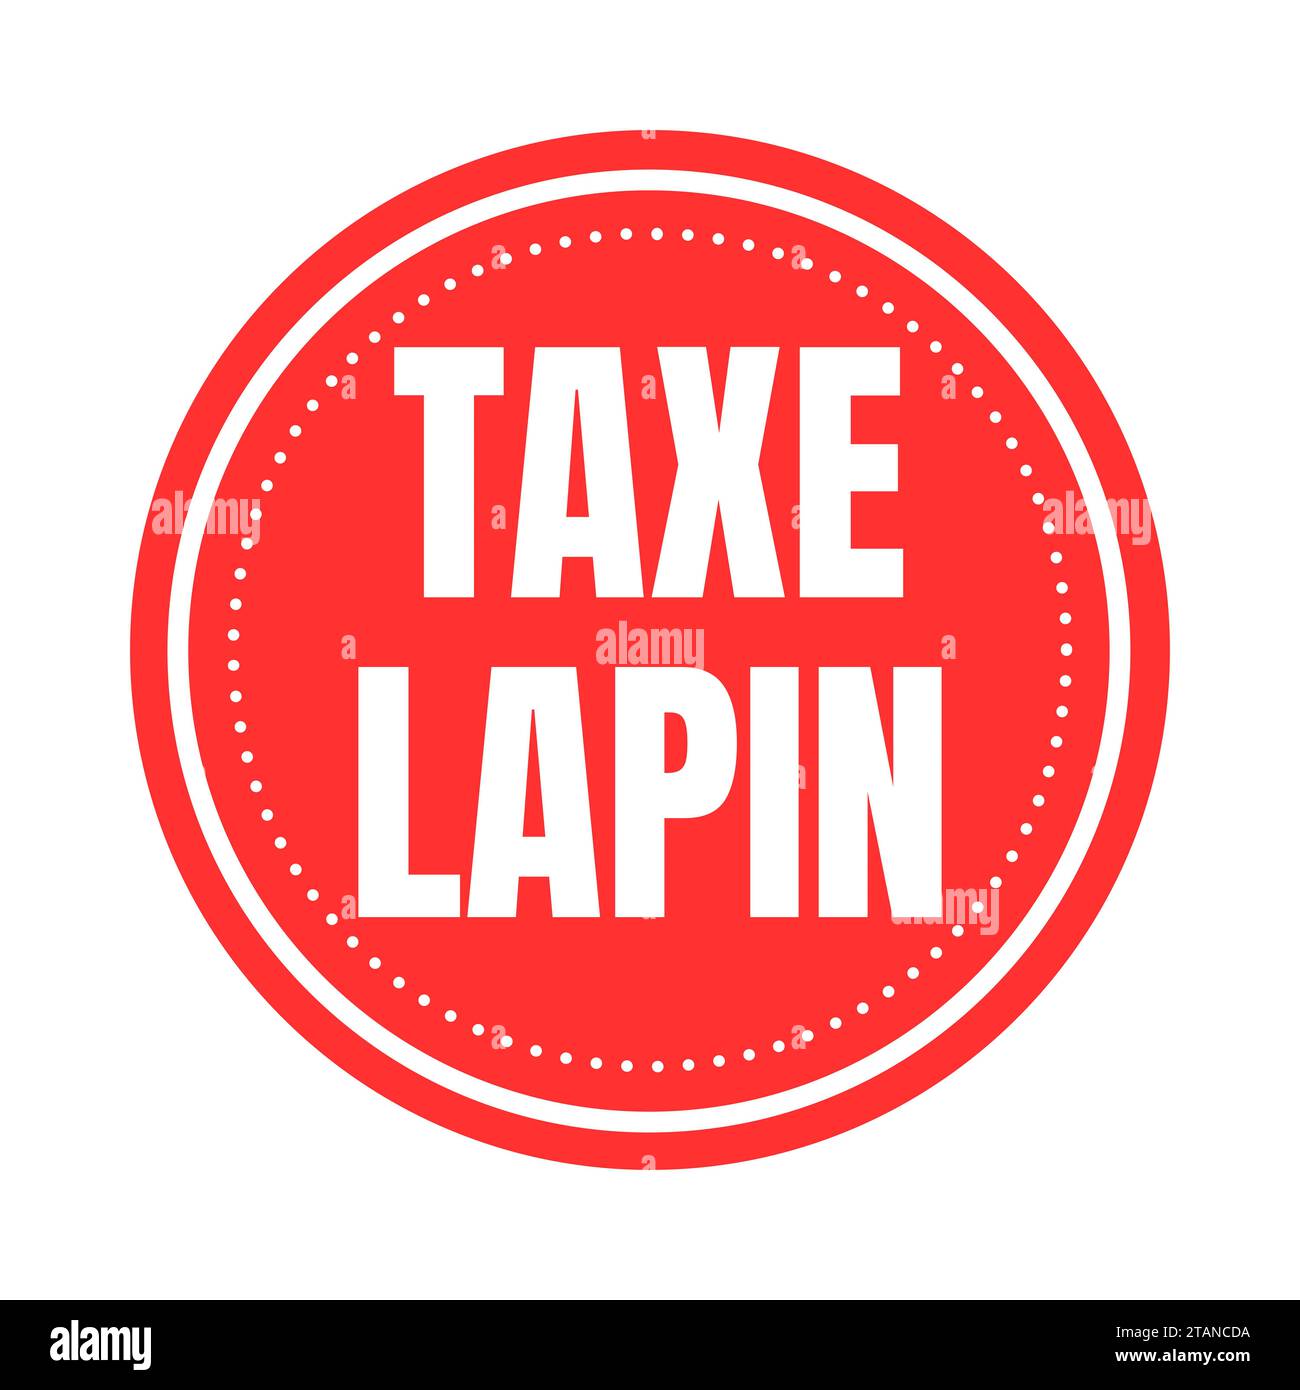 Lapin tax in France symbol icon Stock Photo